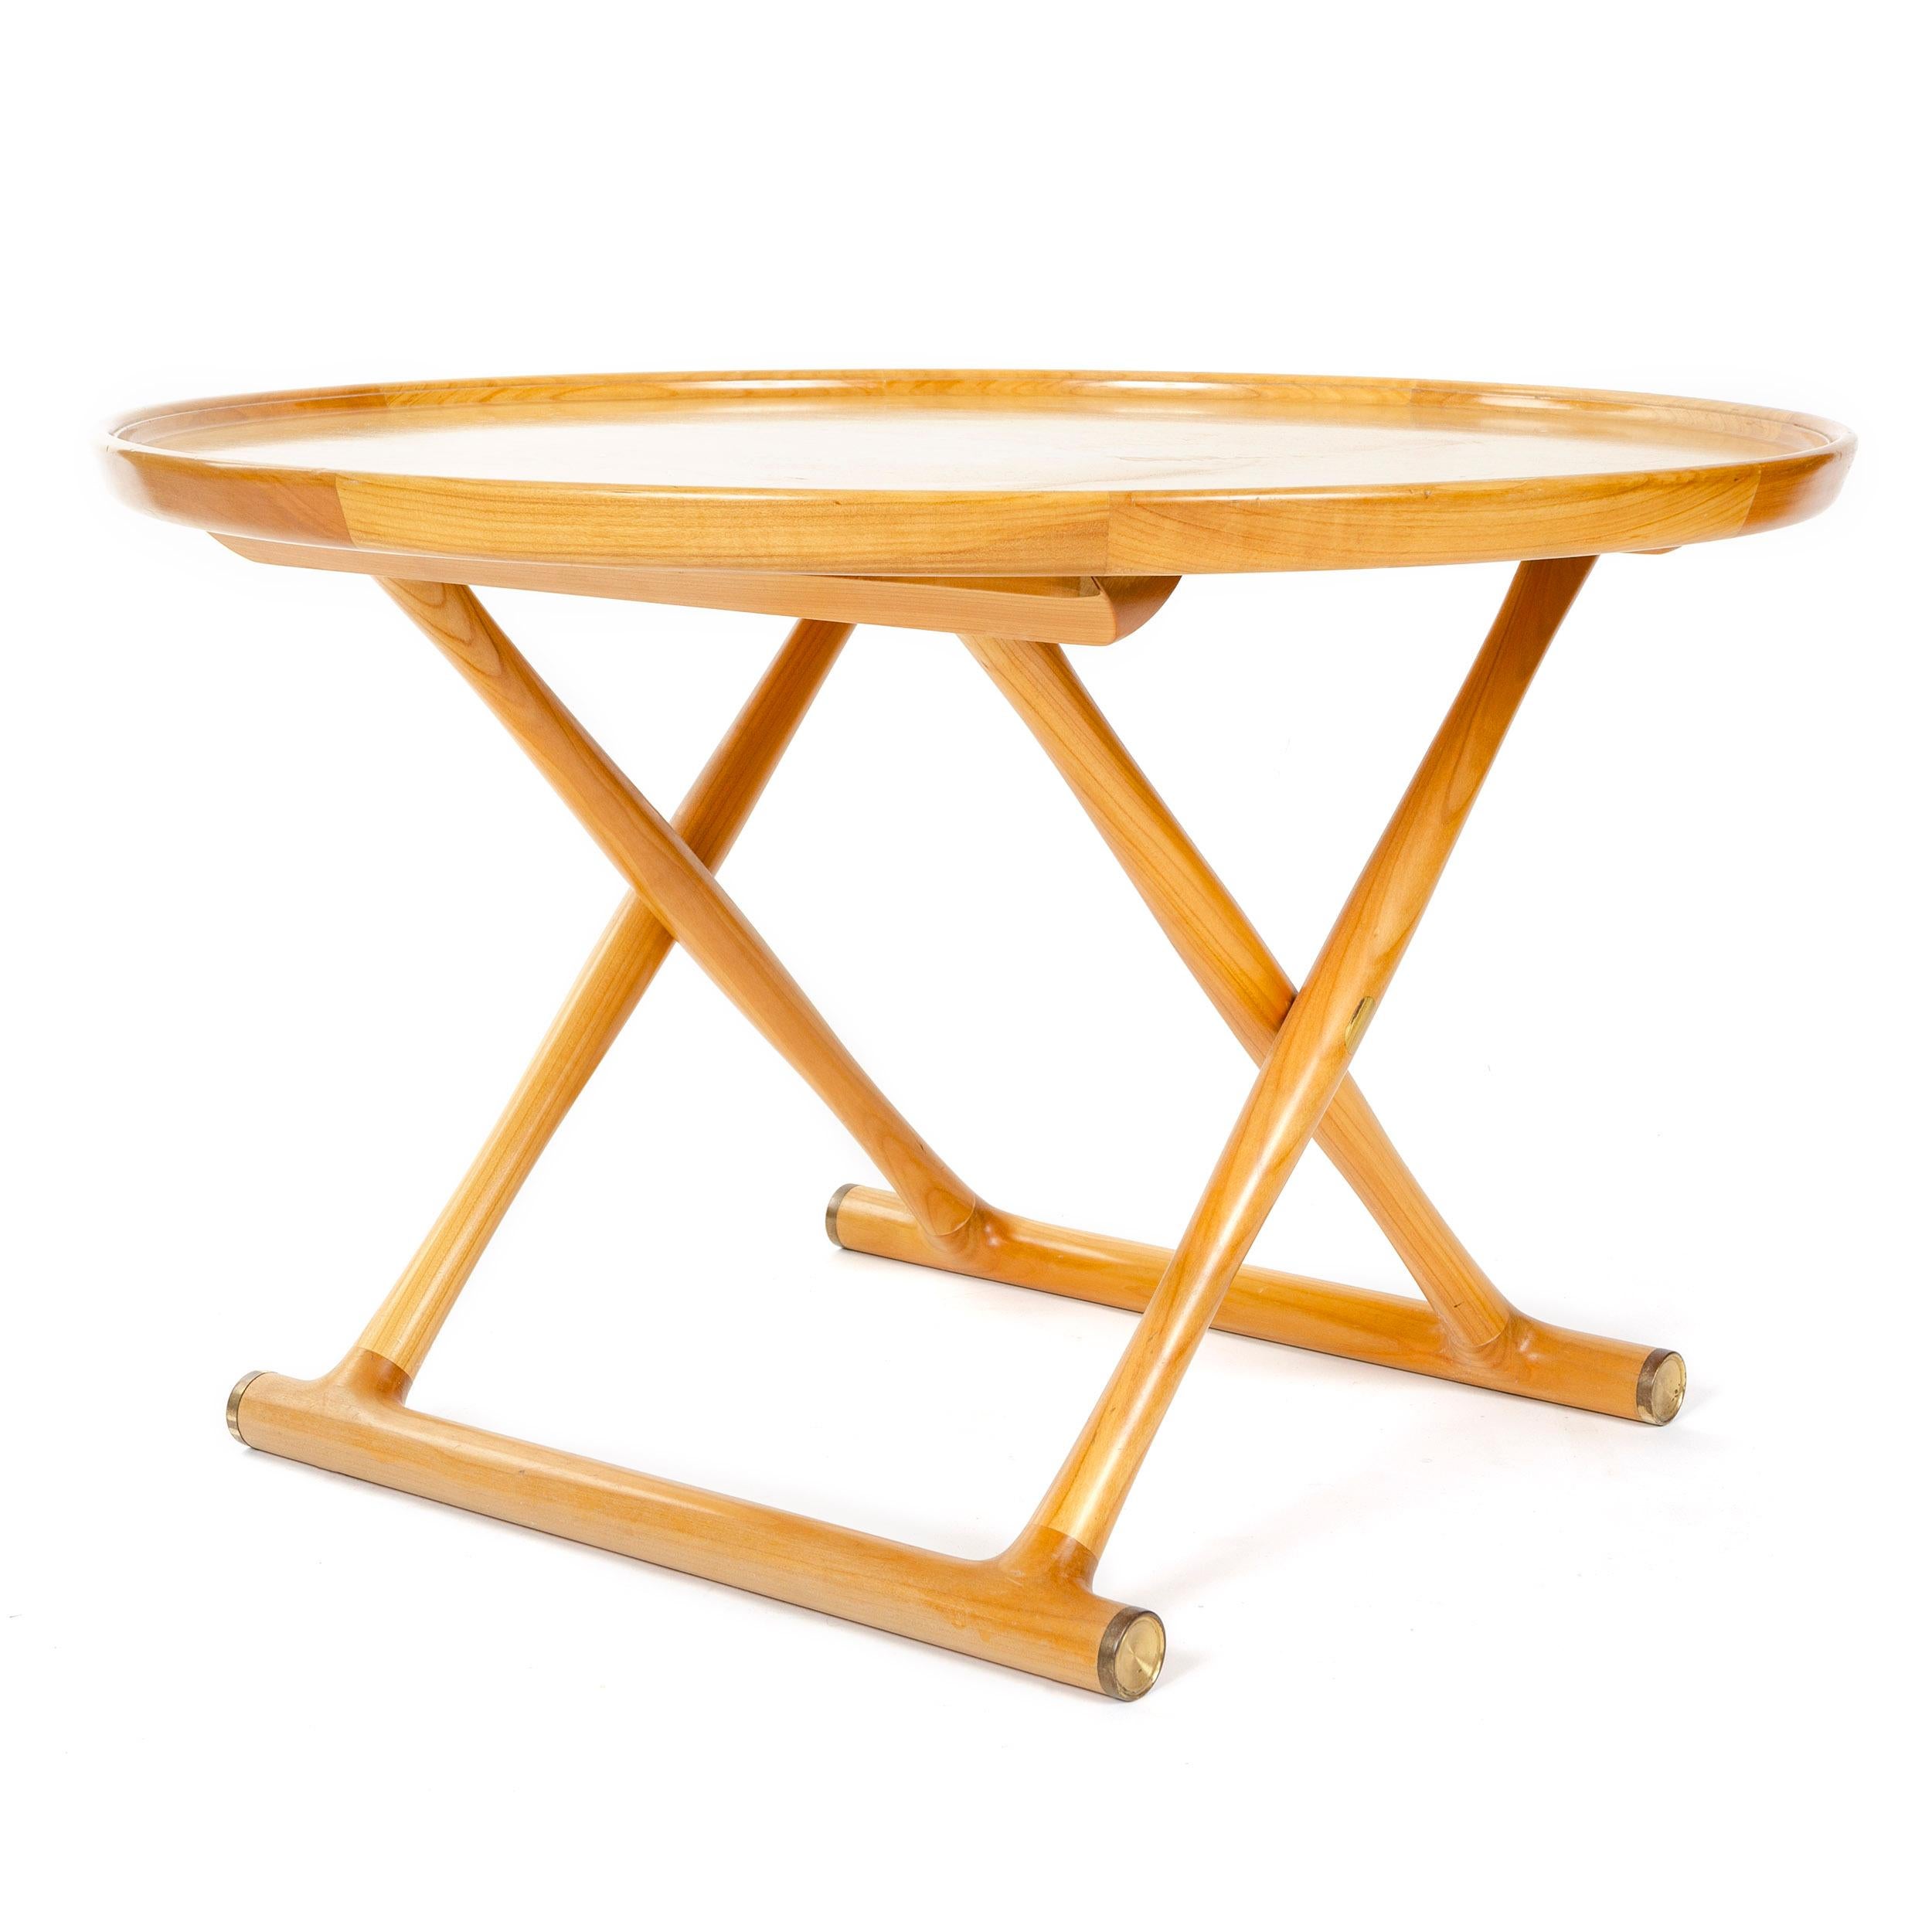 An Egyptian table designed by Mogens Lassen in light maple wood with a circular top, folding X-form legs and brass capped floor stretchers. Crafted by cabinetmaker A. J. Iversen in Denmark circa 1950s.
  